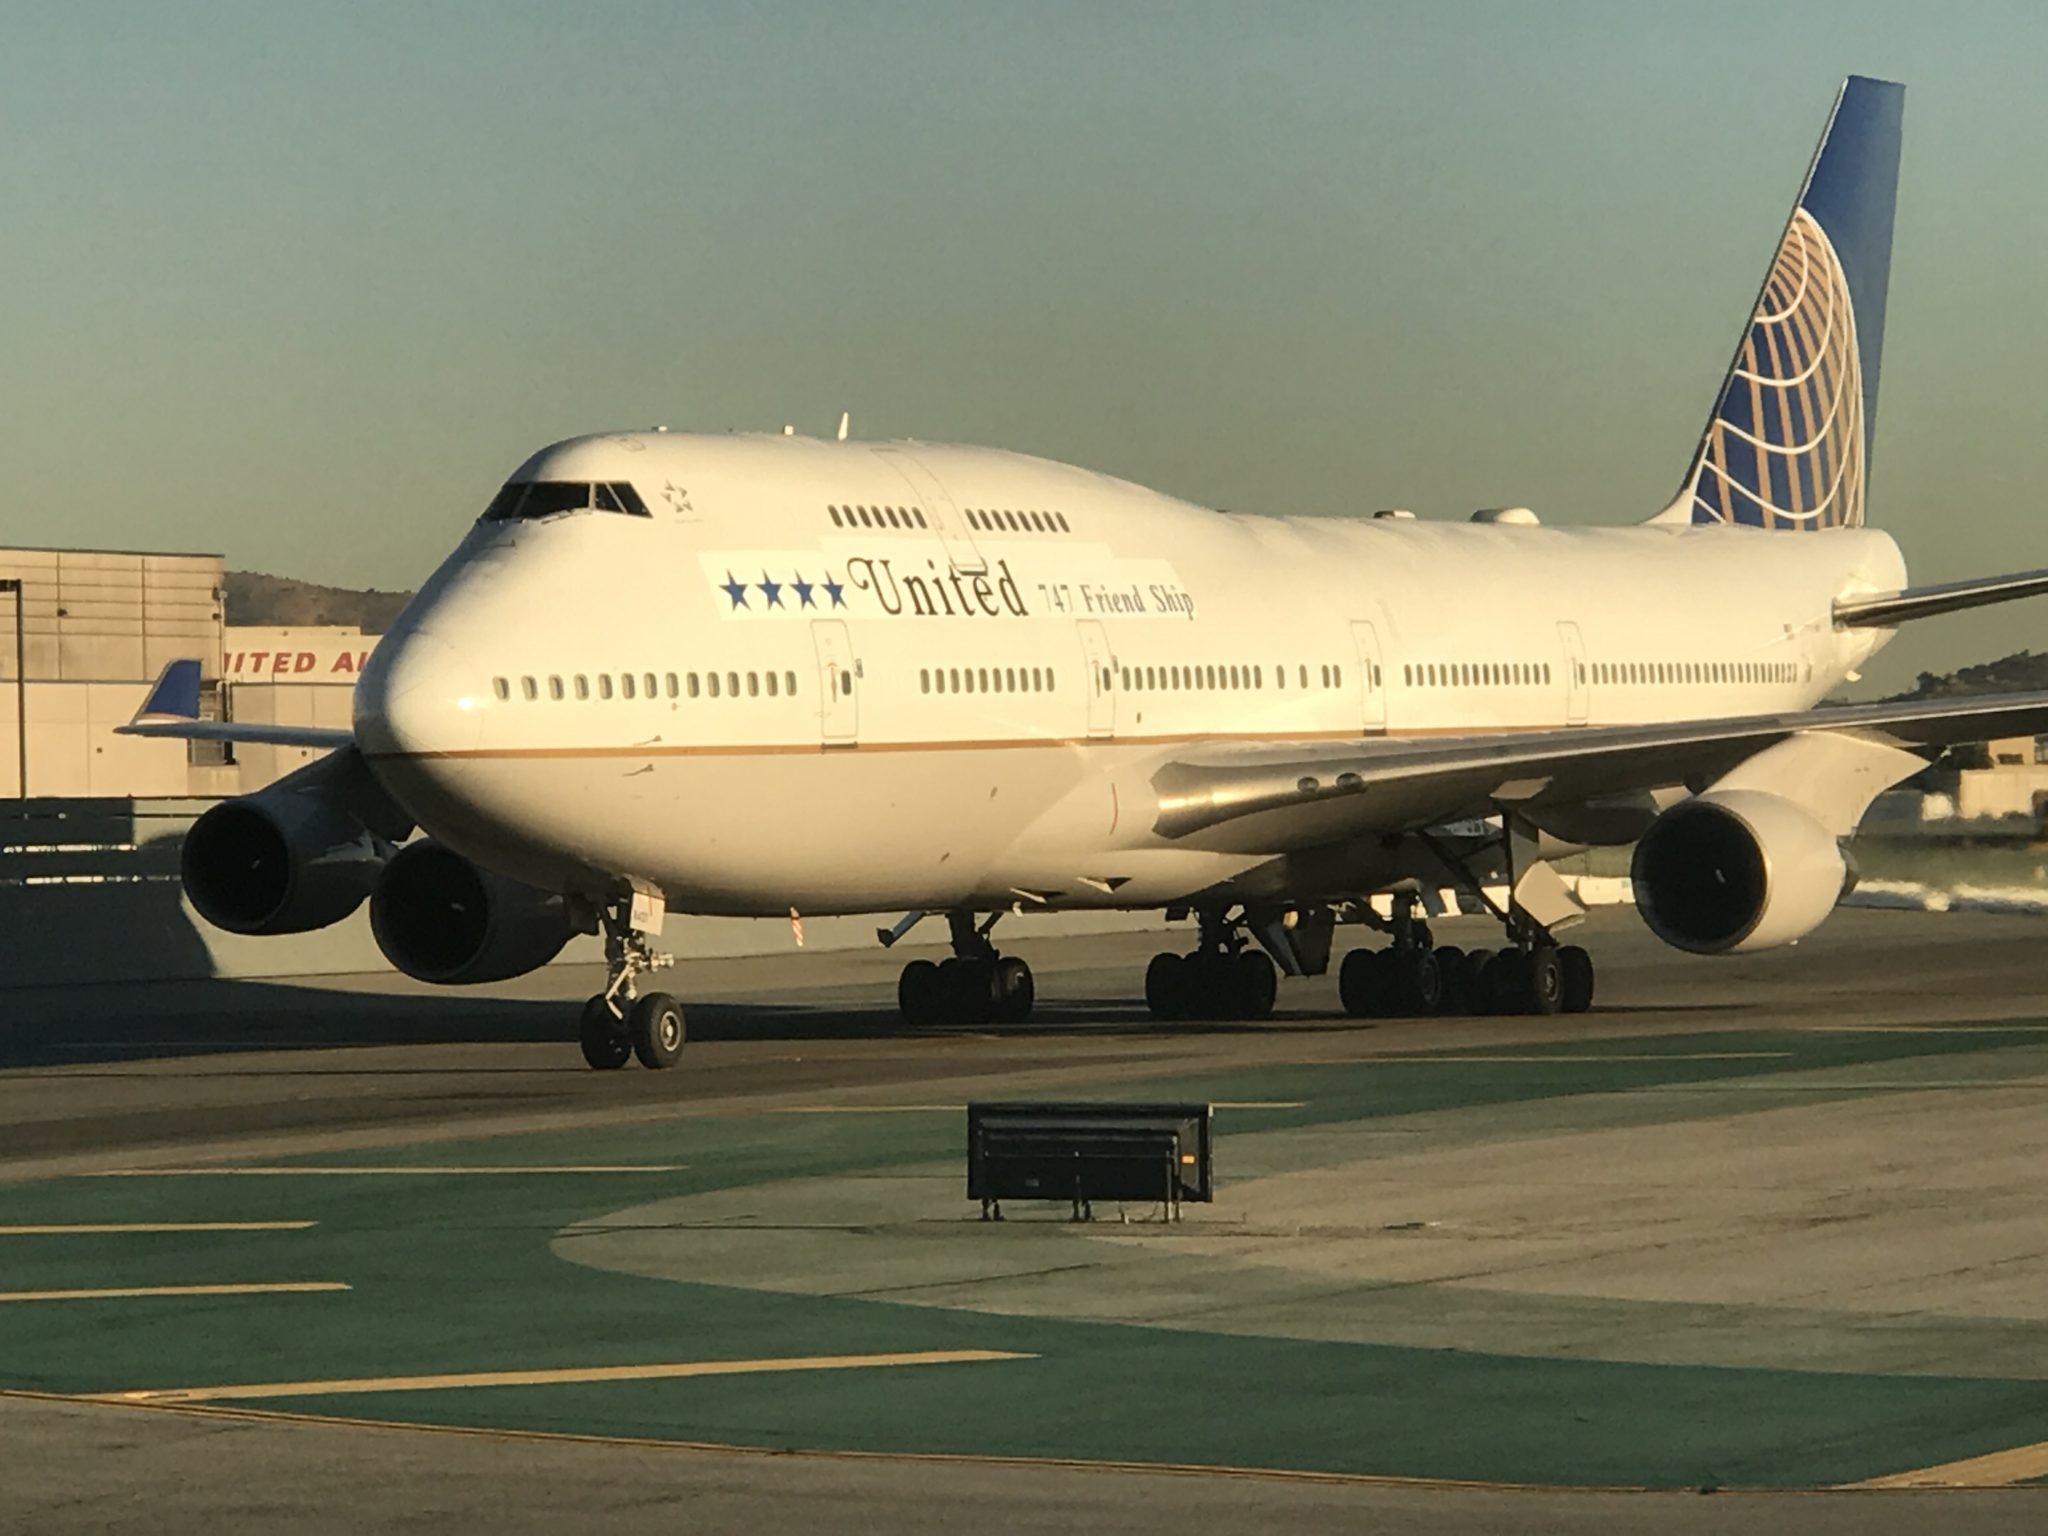 Farewell to The Queen-Flying United’s Last Boeing 747! (Part 1-Getting There).